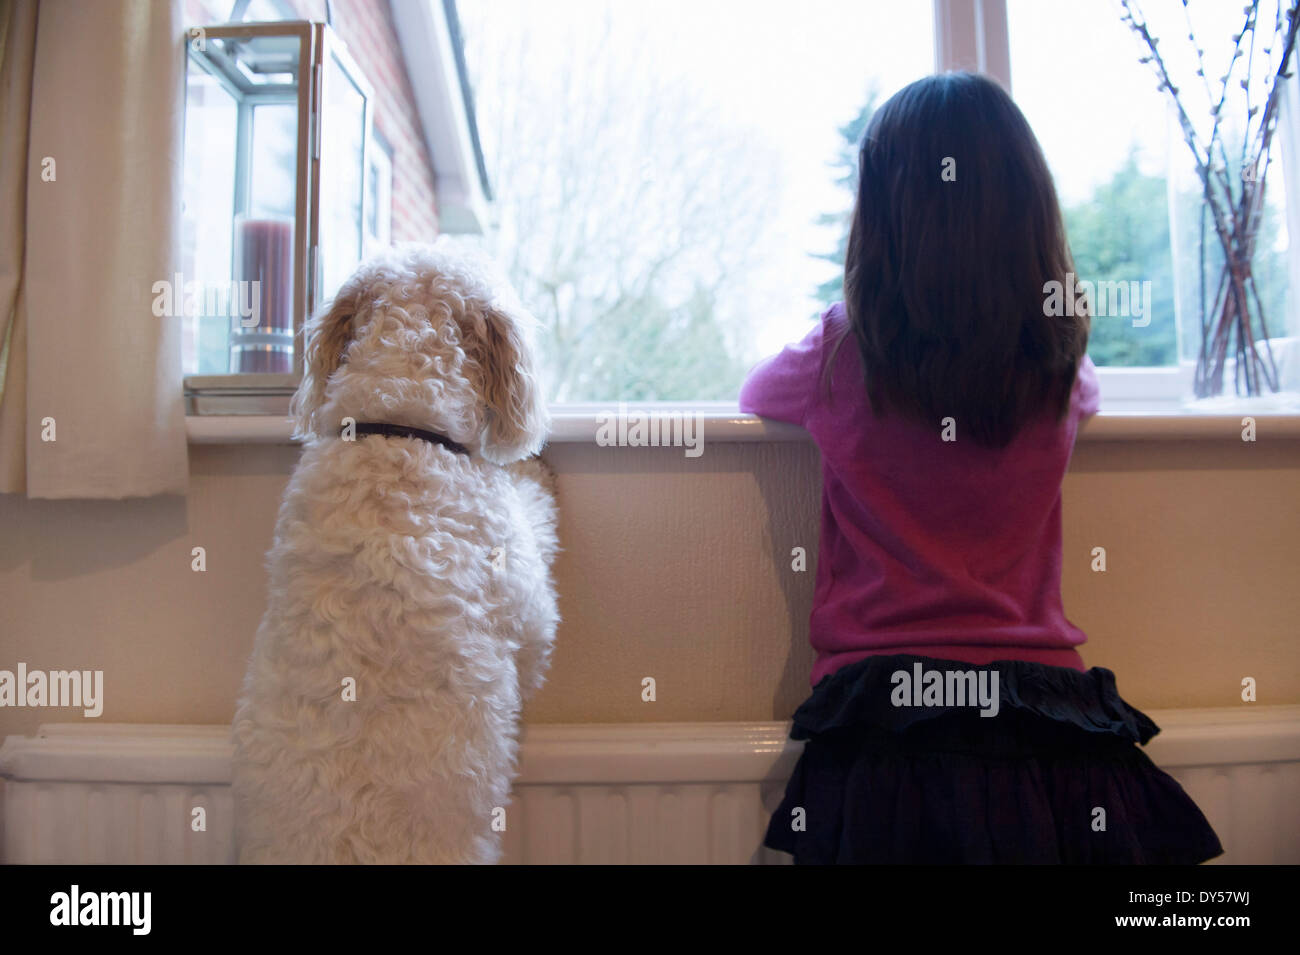 Girl and her pet dog standing and looking out of window Stock Photo